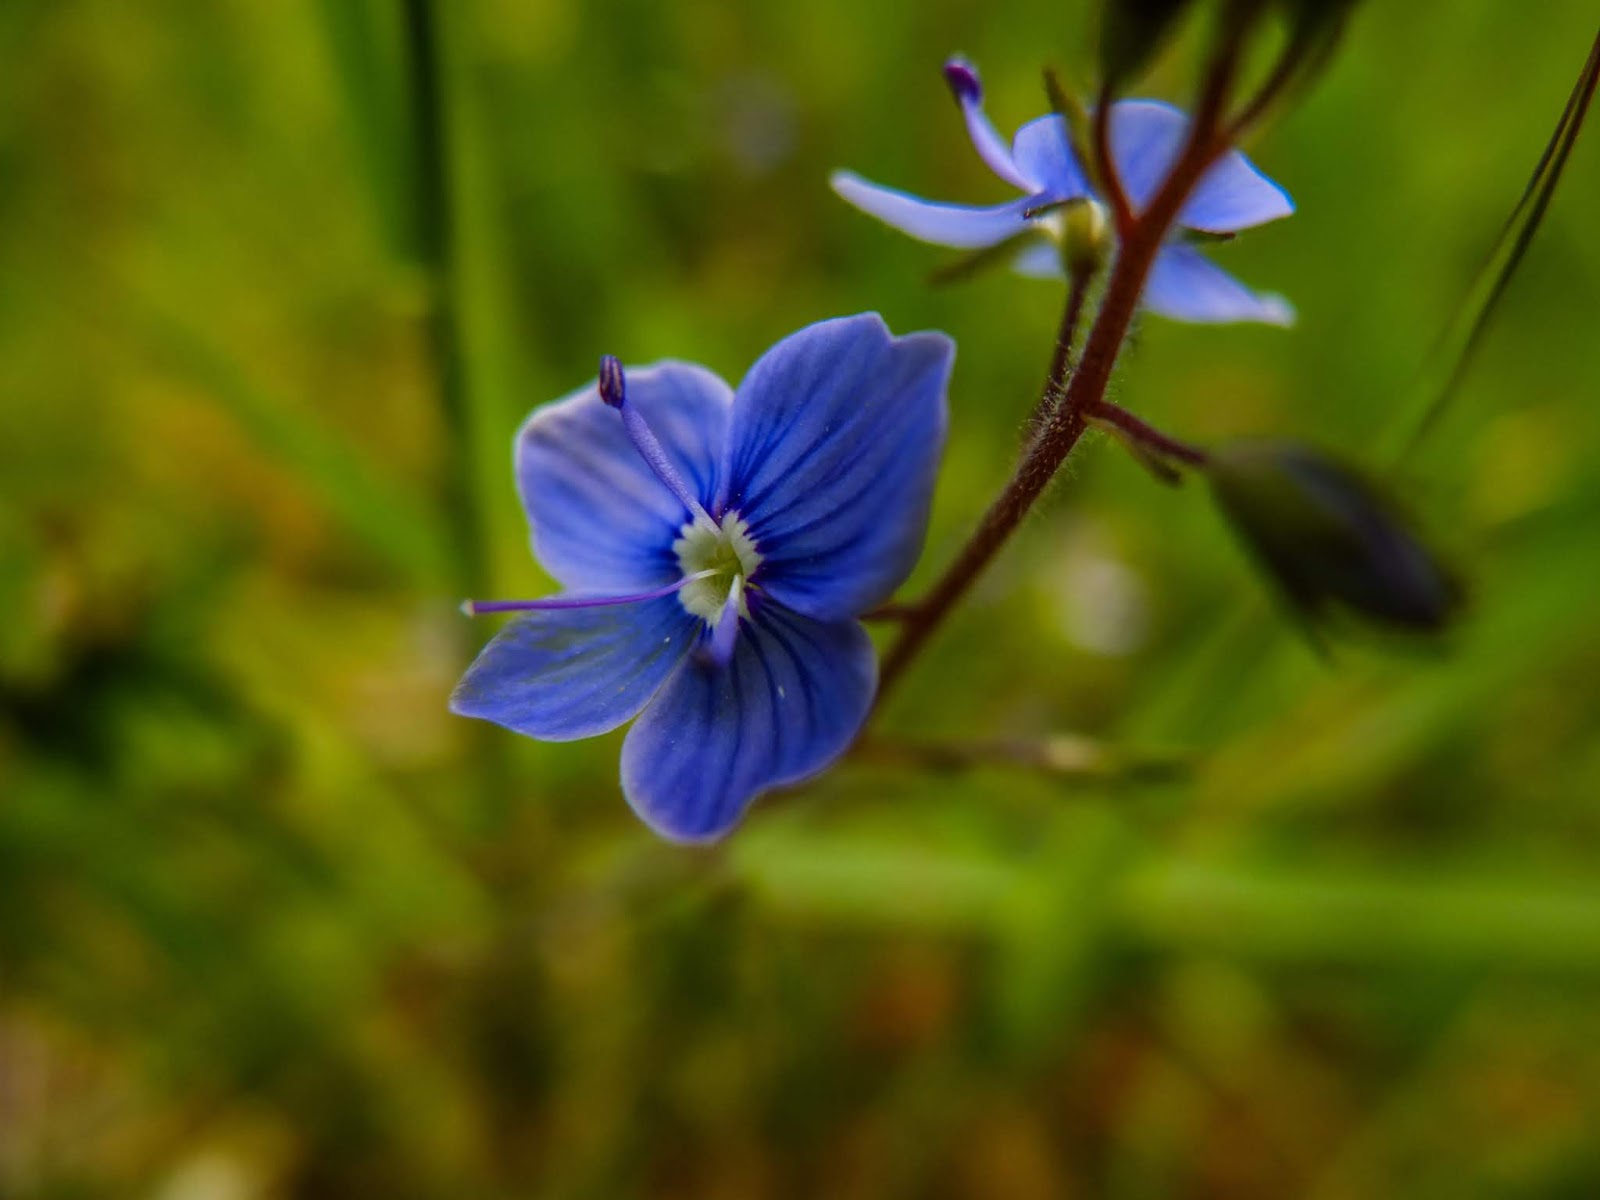 A little blue flower on the tip of a stem hanging down.